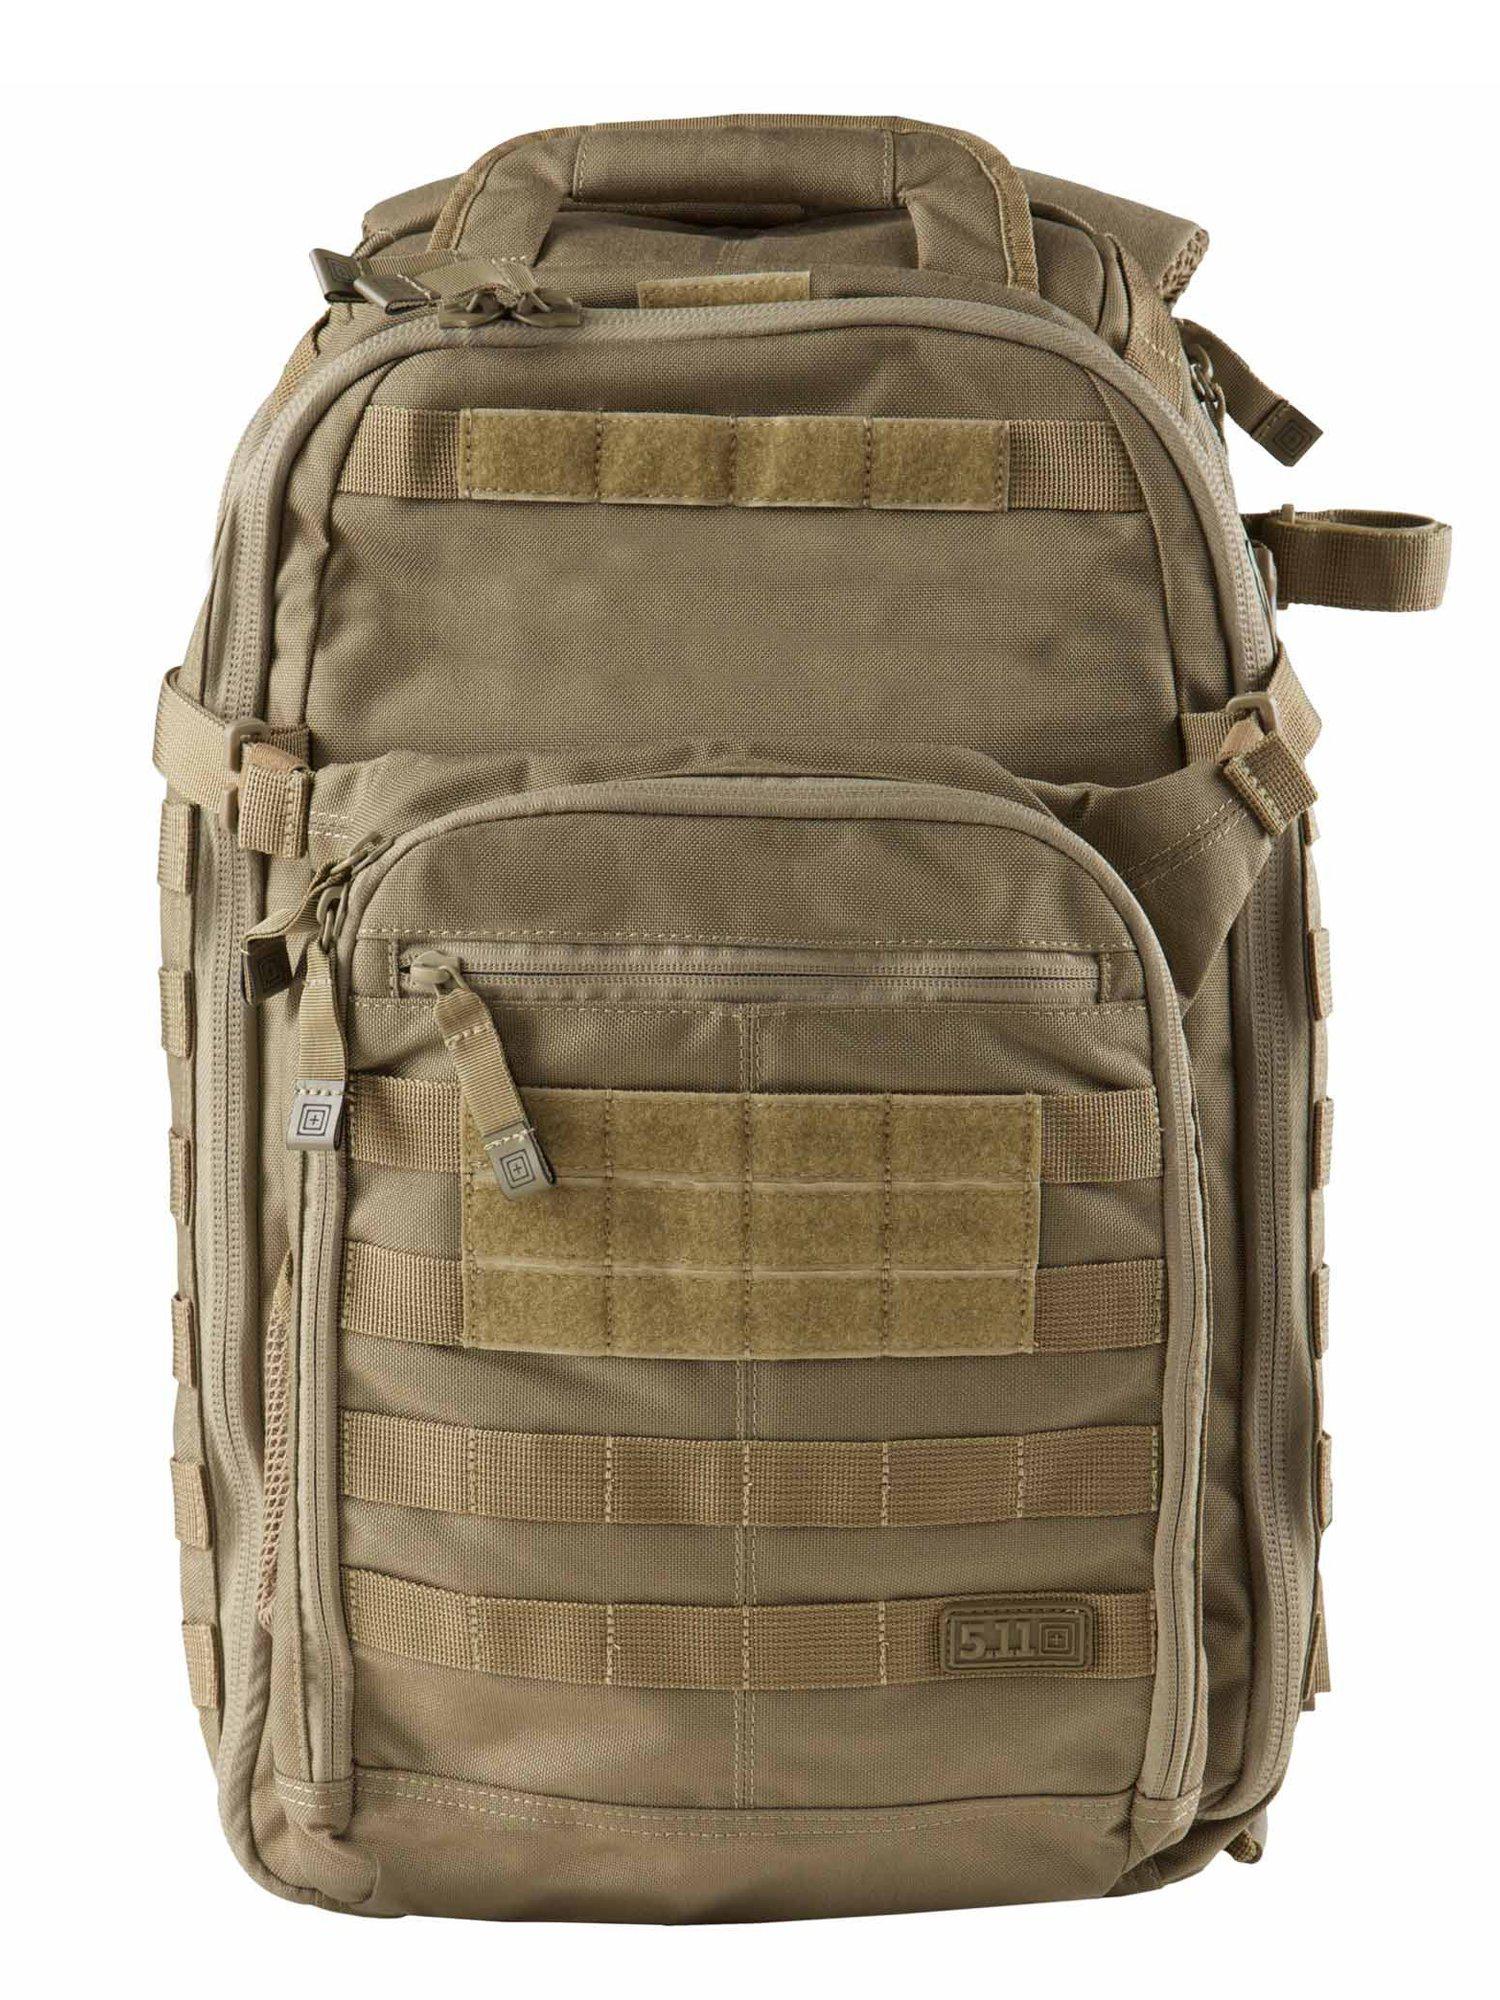 5.11 Tactical All Hazards Prime Backpack - TacSource